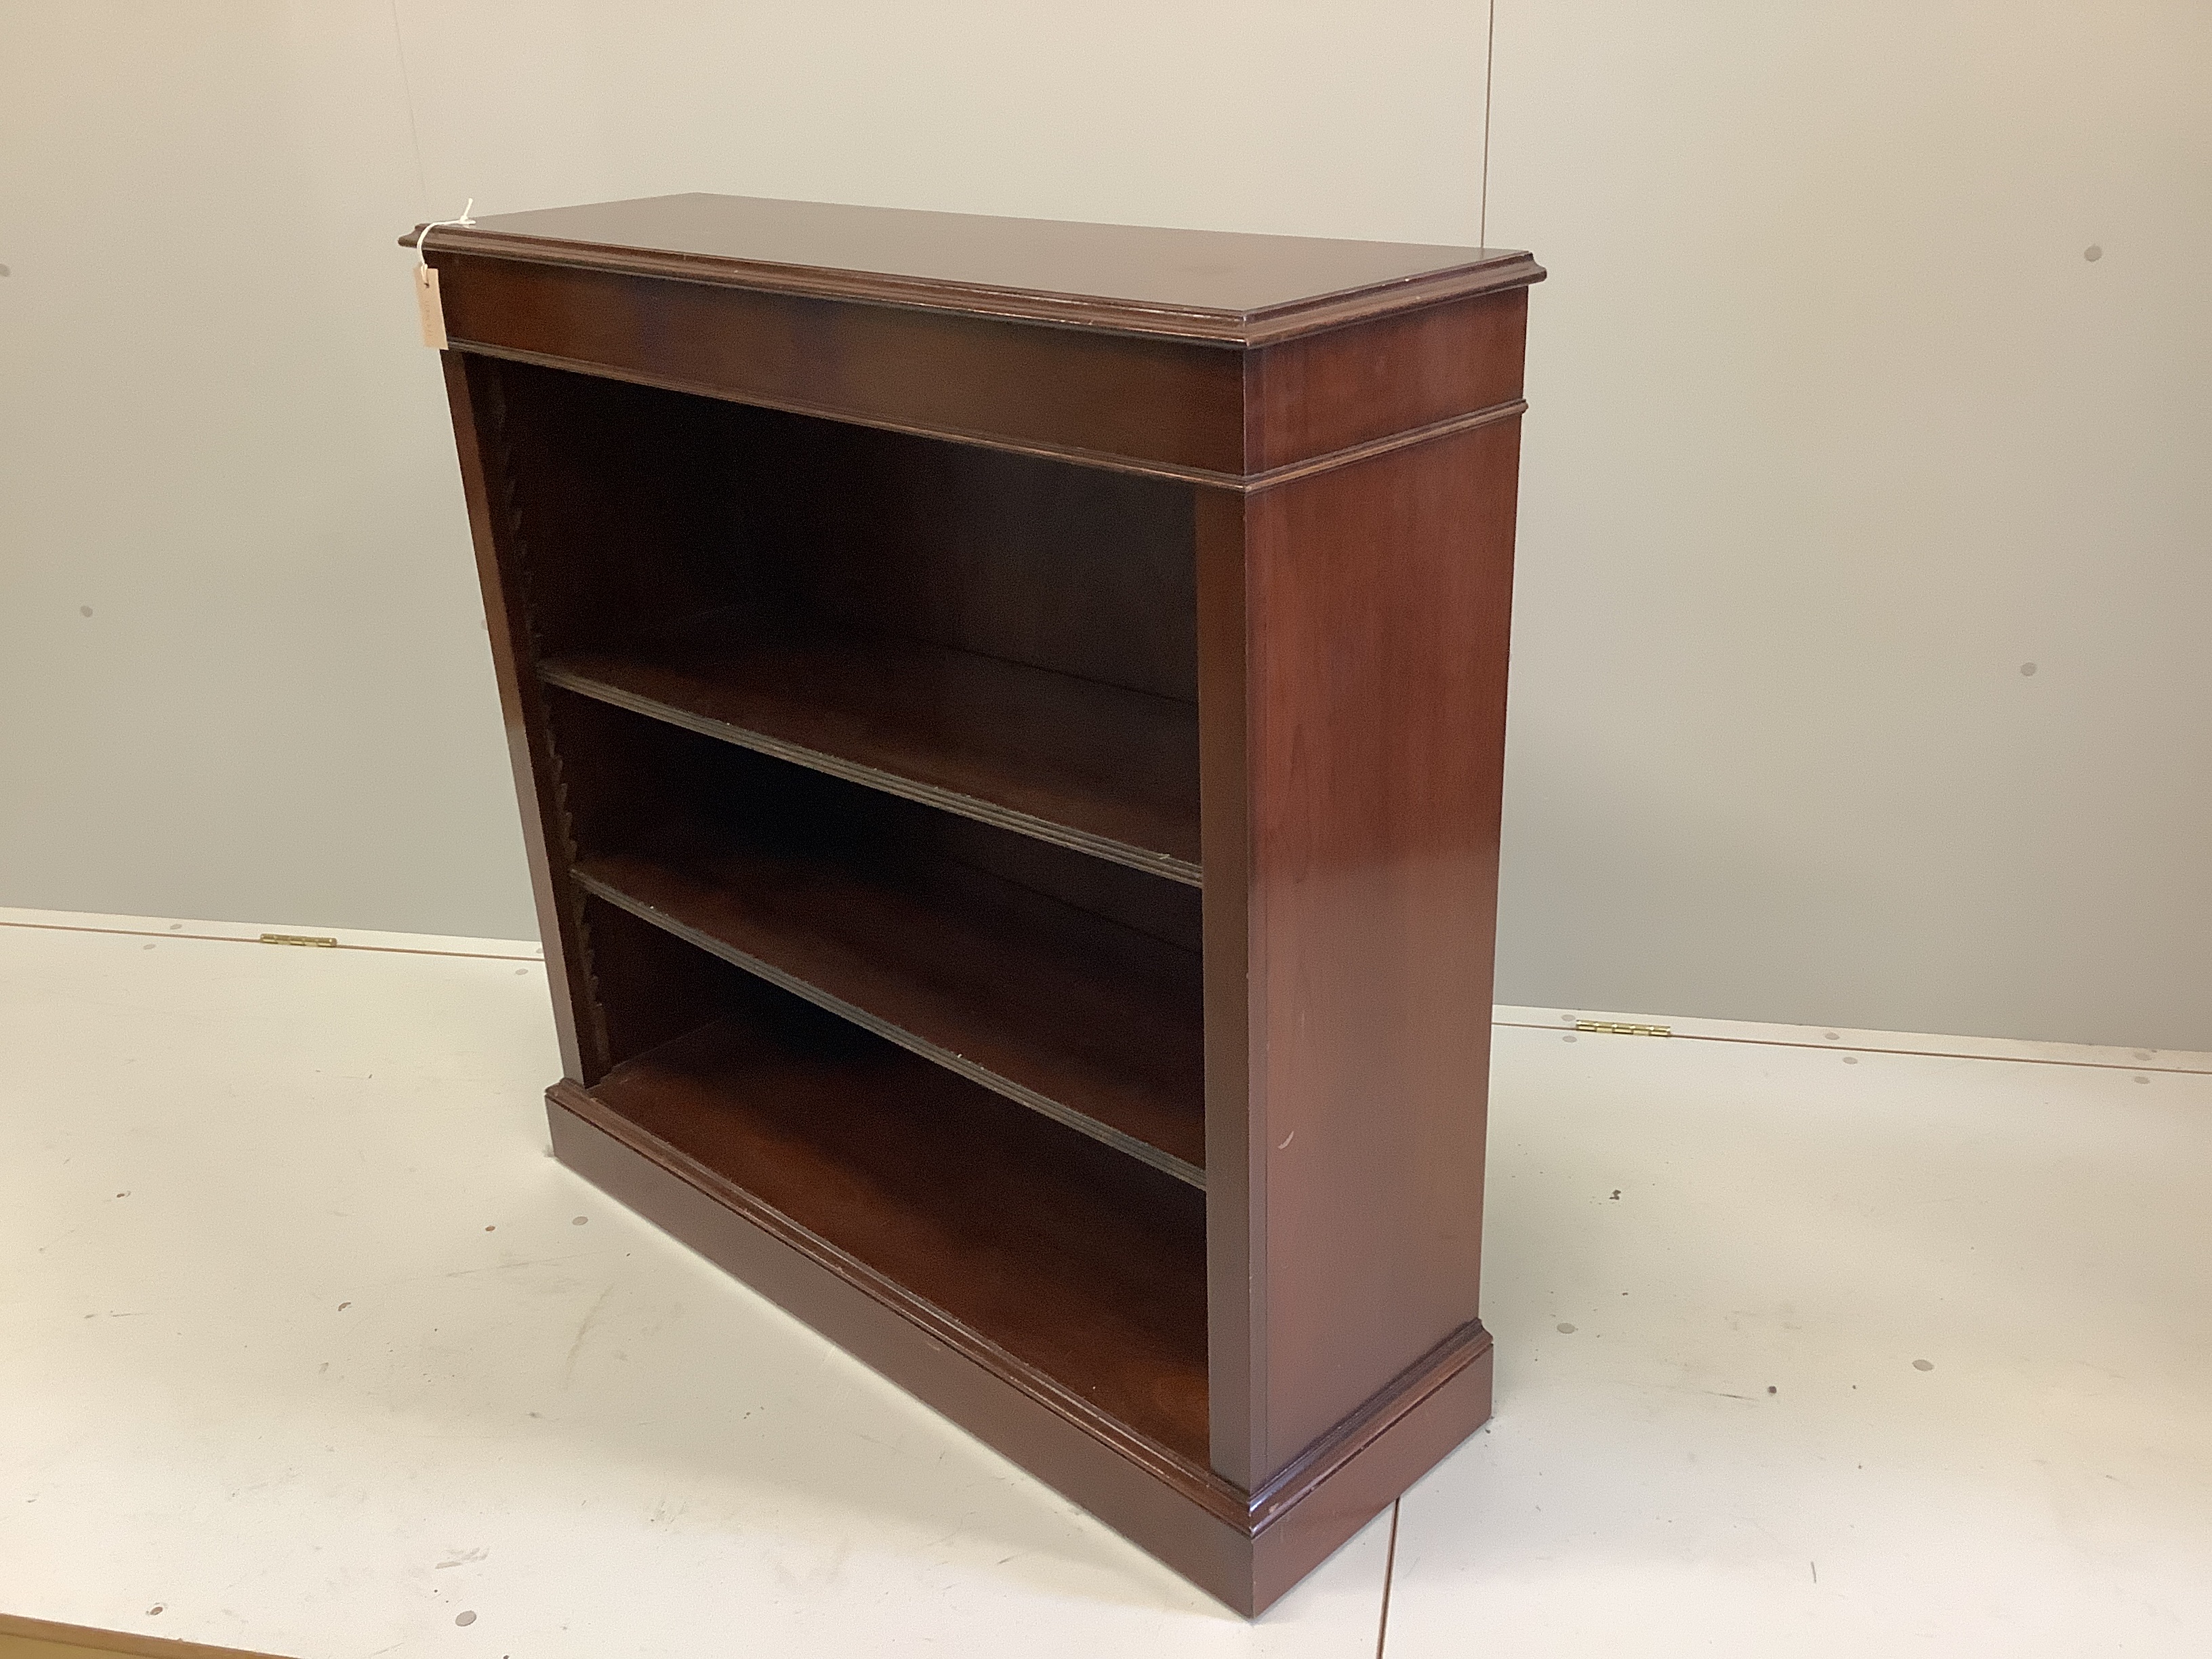 A reproduction Victorian style mahogany open bookcase, width 102cm, depth 32cm, height 100cm